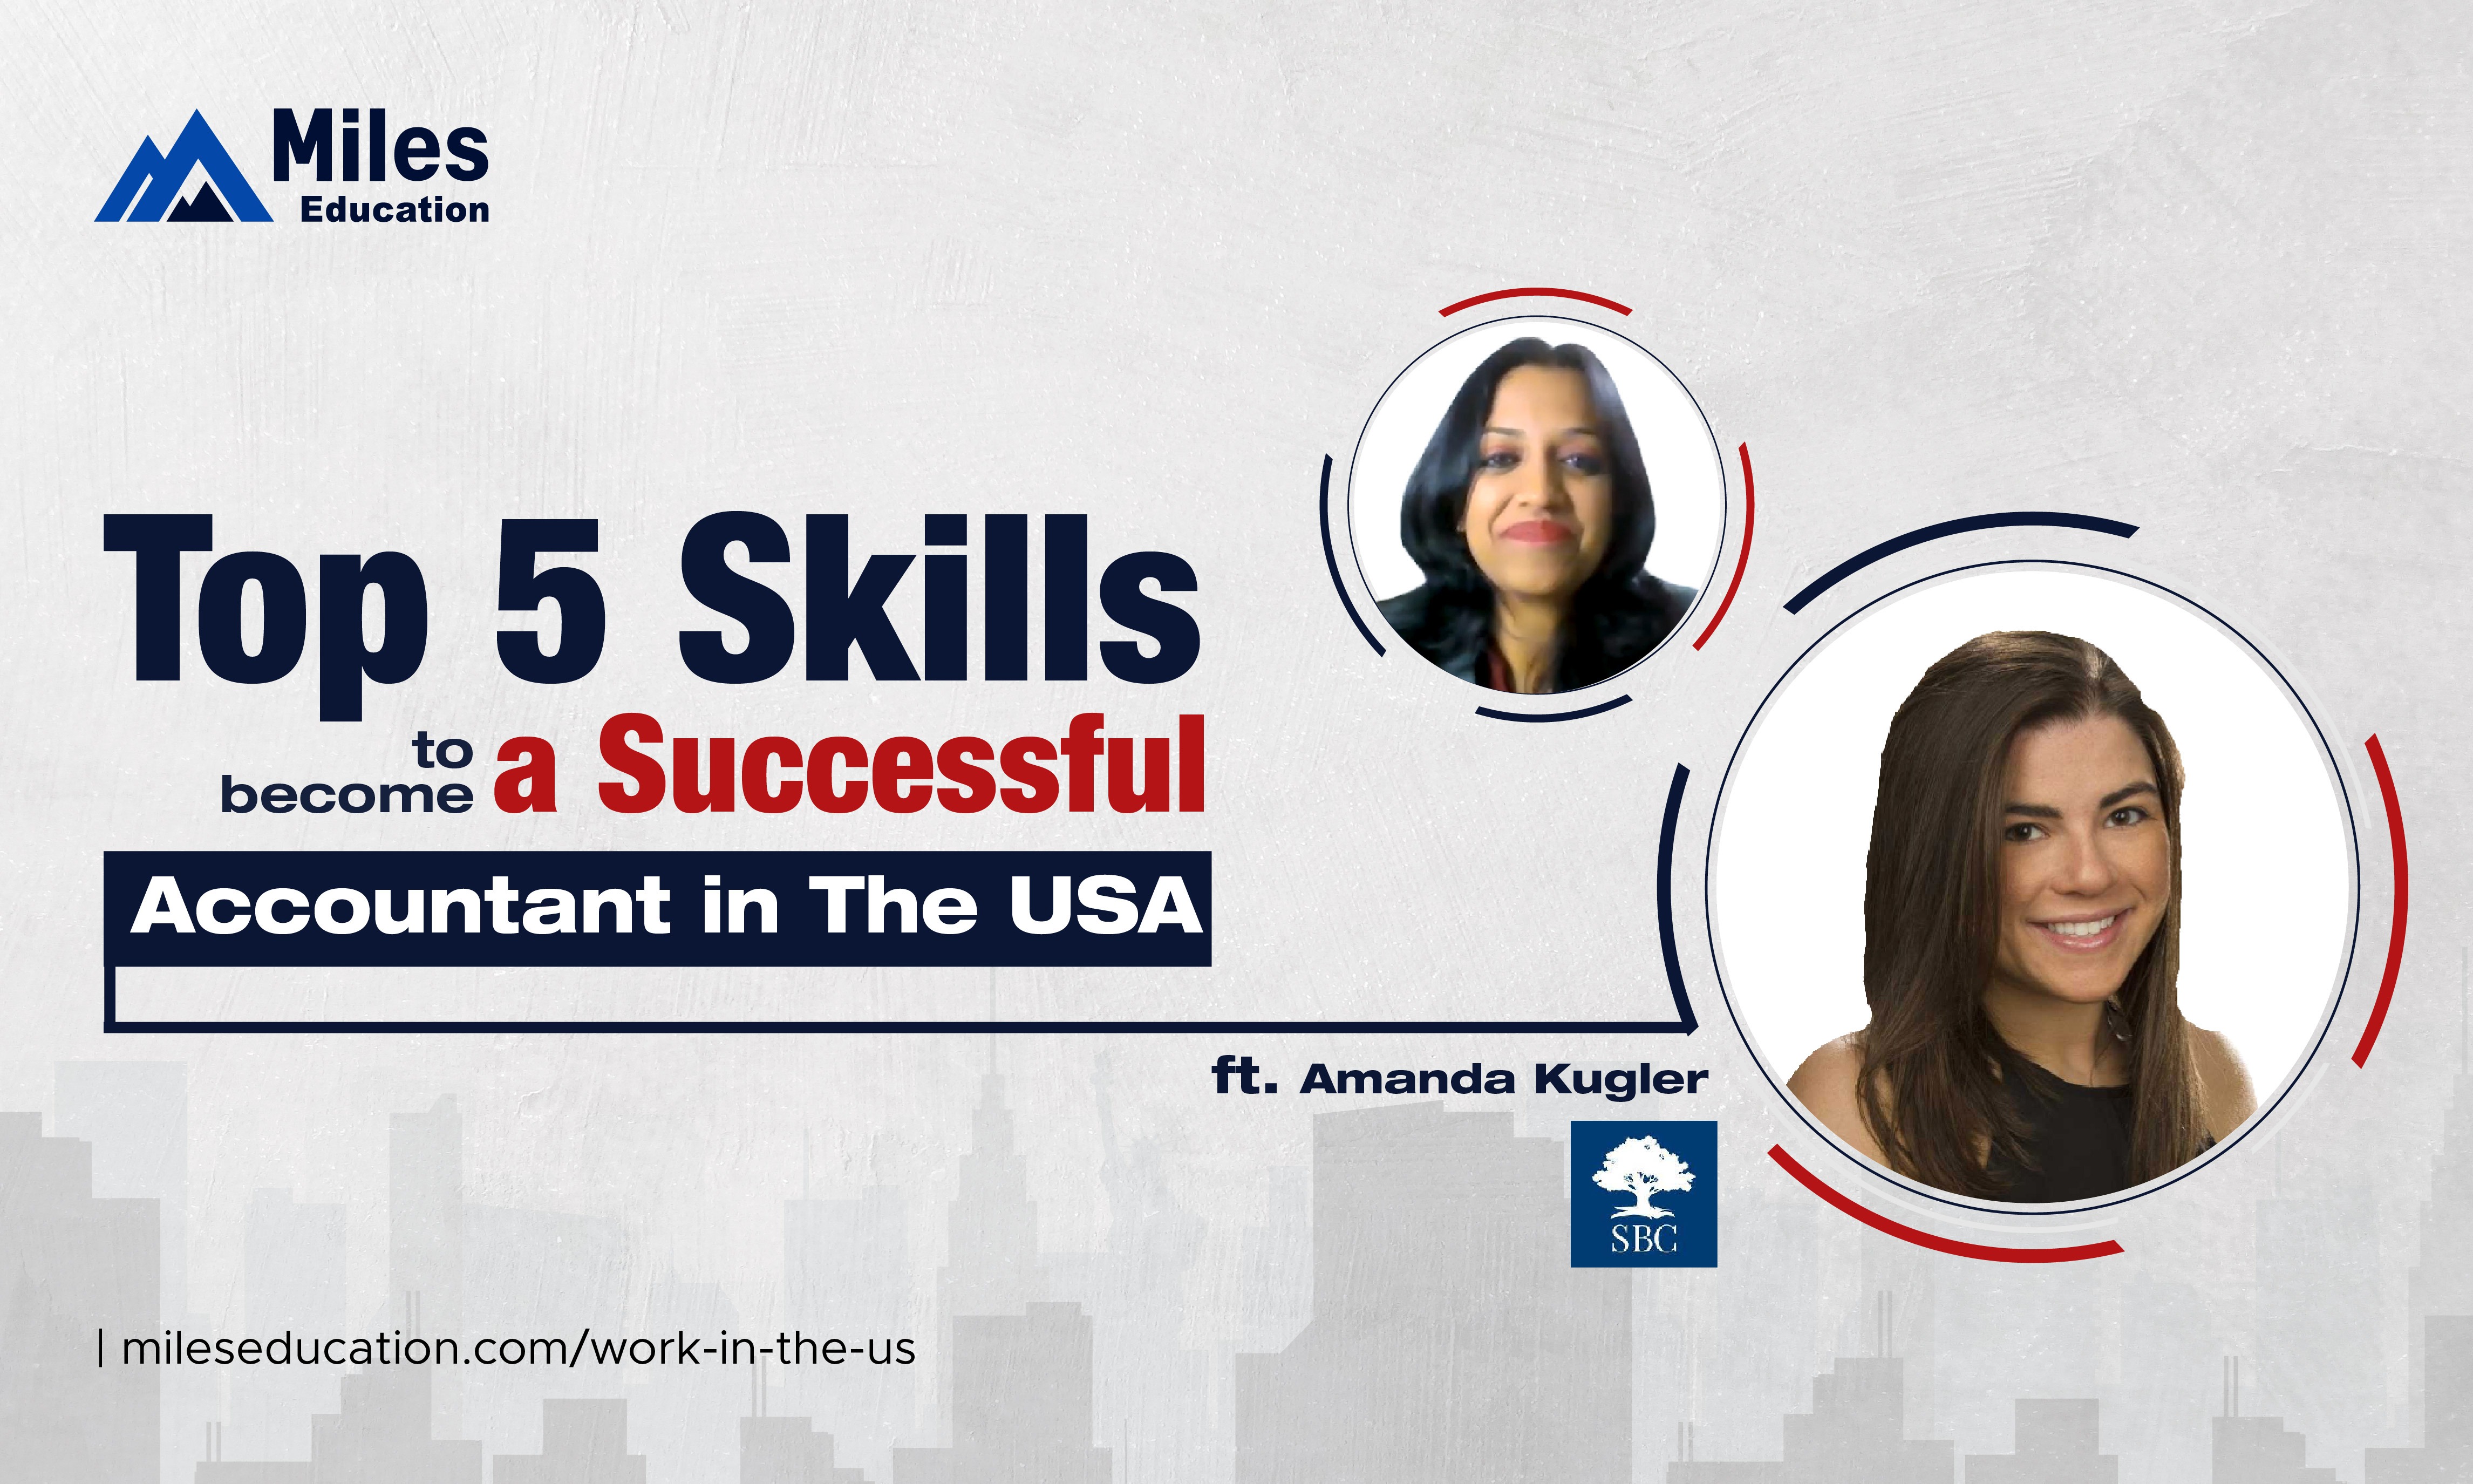 Top 5 skills to become a successful accountant in the USA!